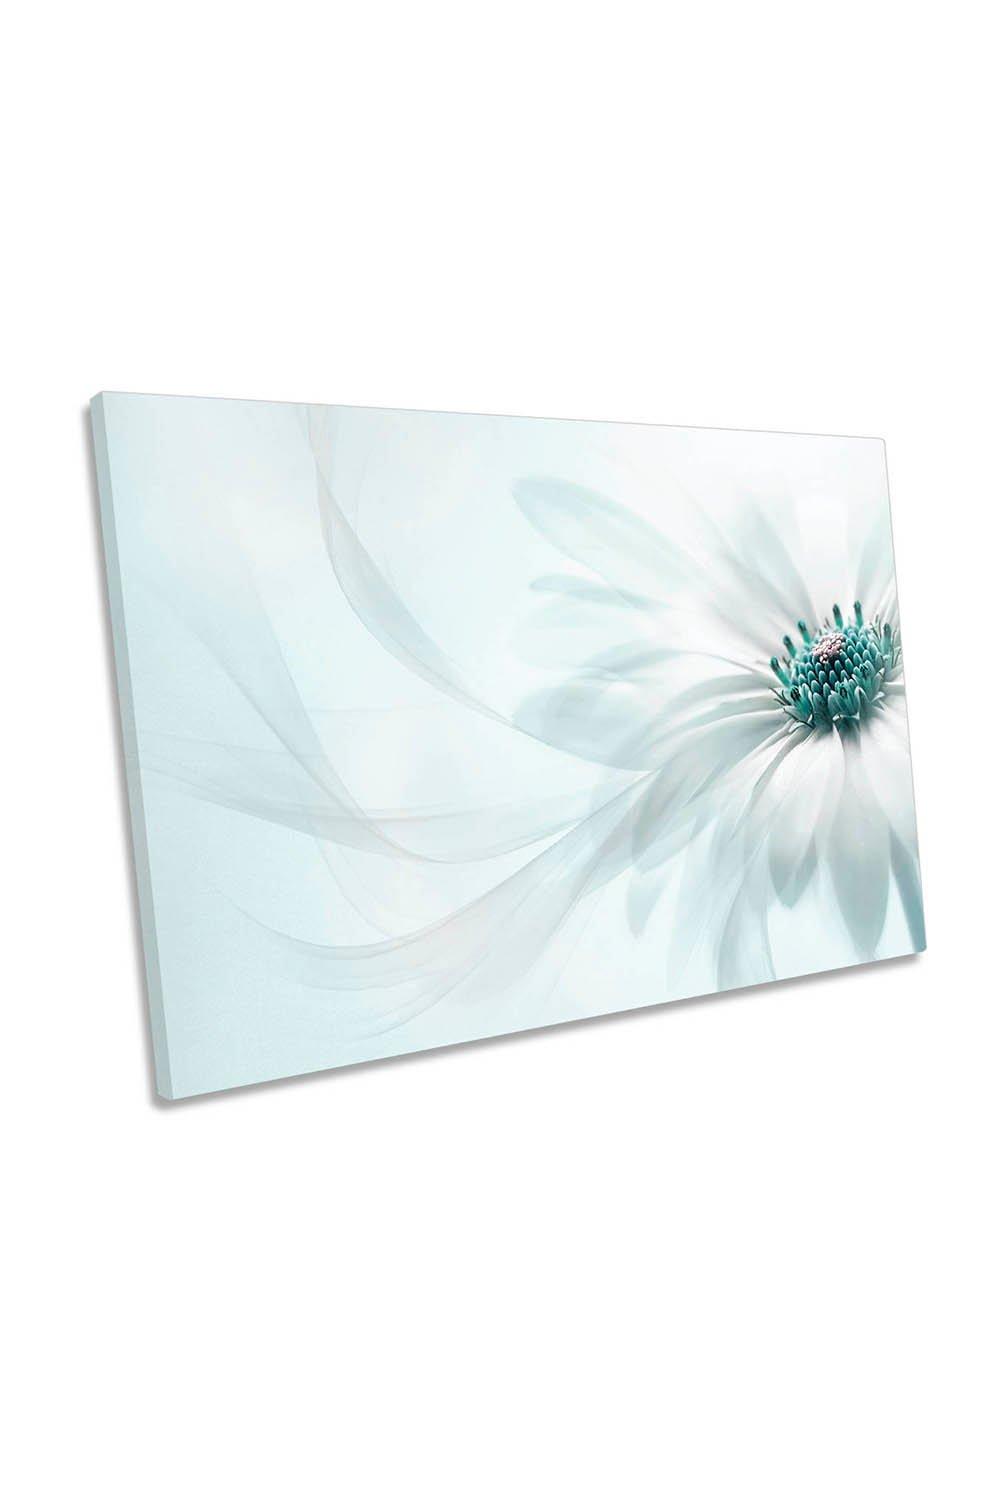 Purity White Daisy Flower Modern Blue Floral Canvas Wall Art Picture Print